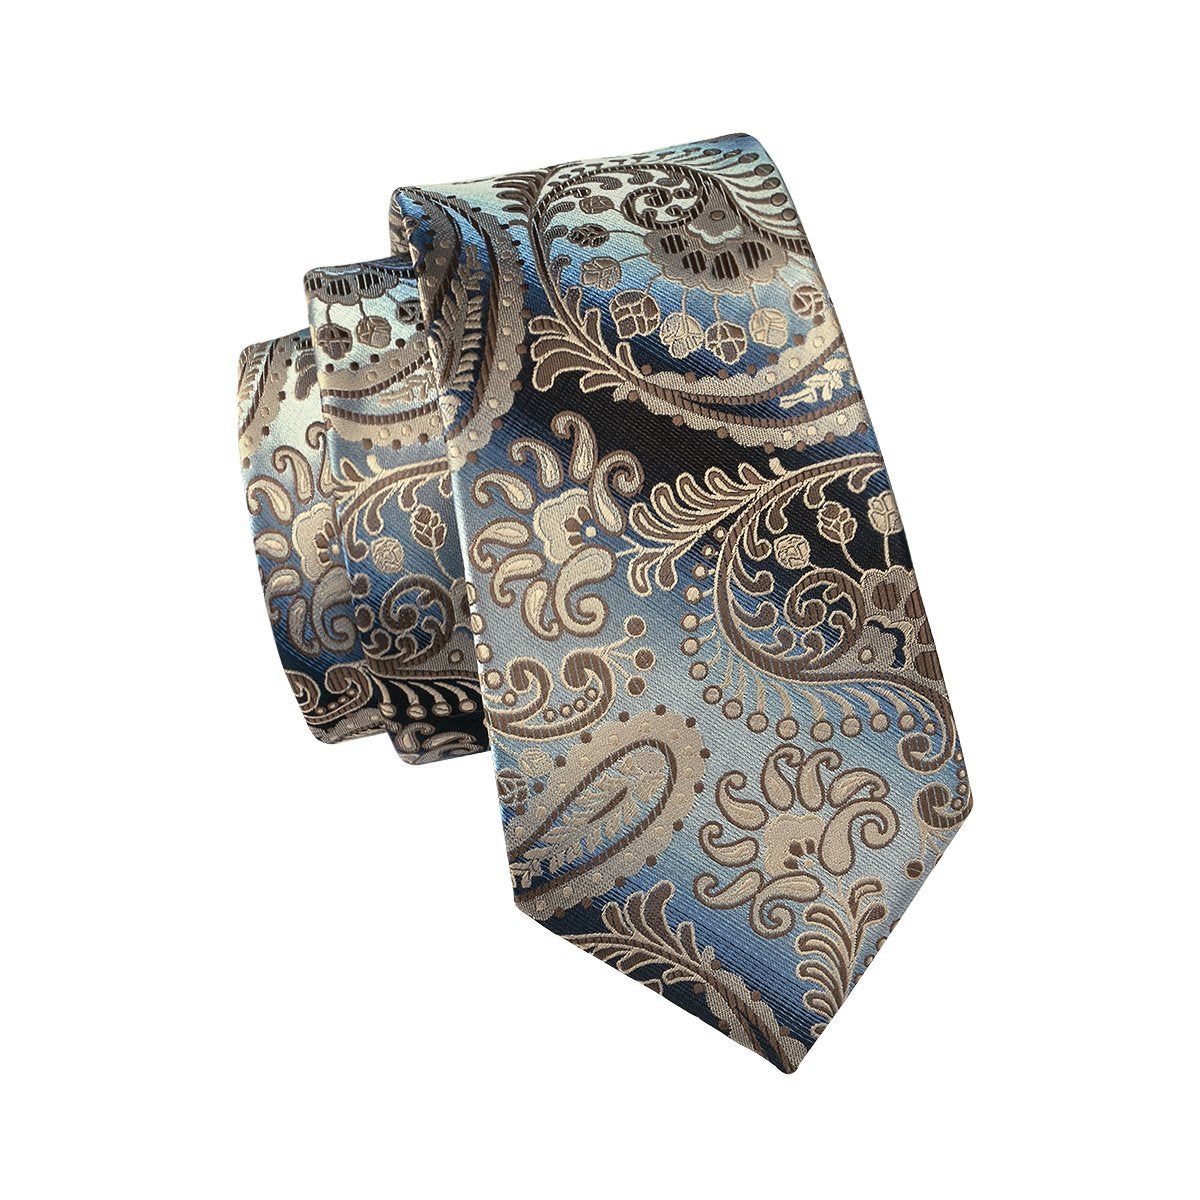 Essential Brown Paisley Tie Pocket Square Cufflinks Set - barry-wang